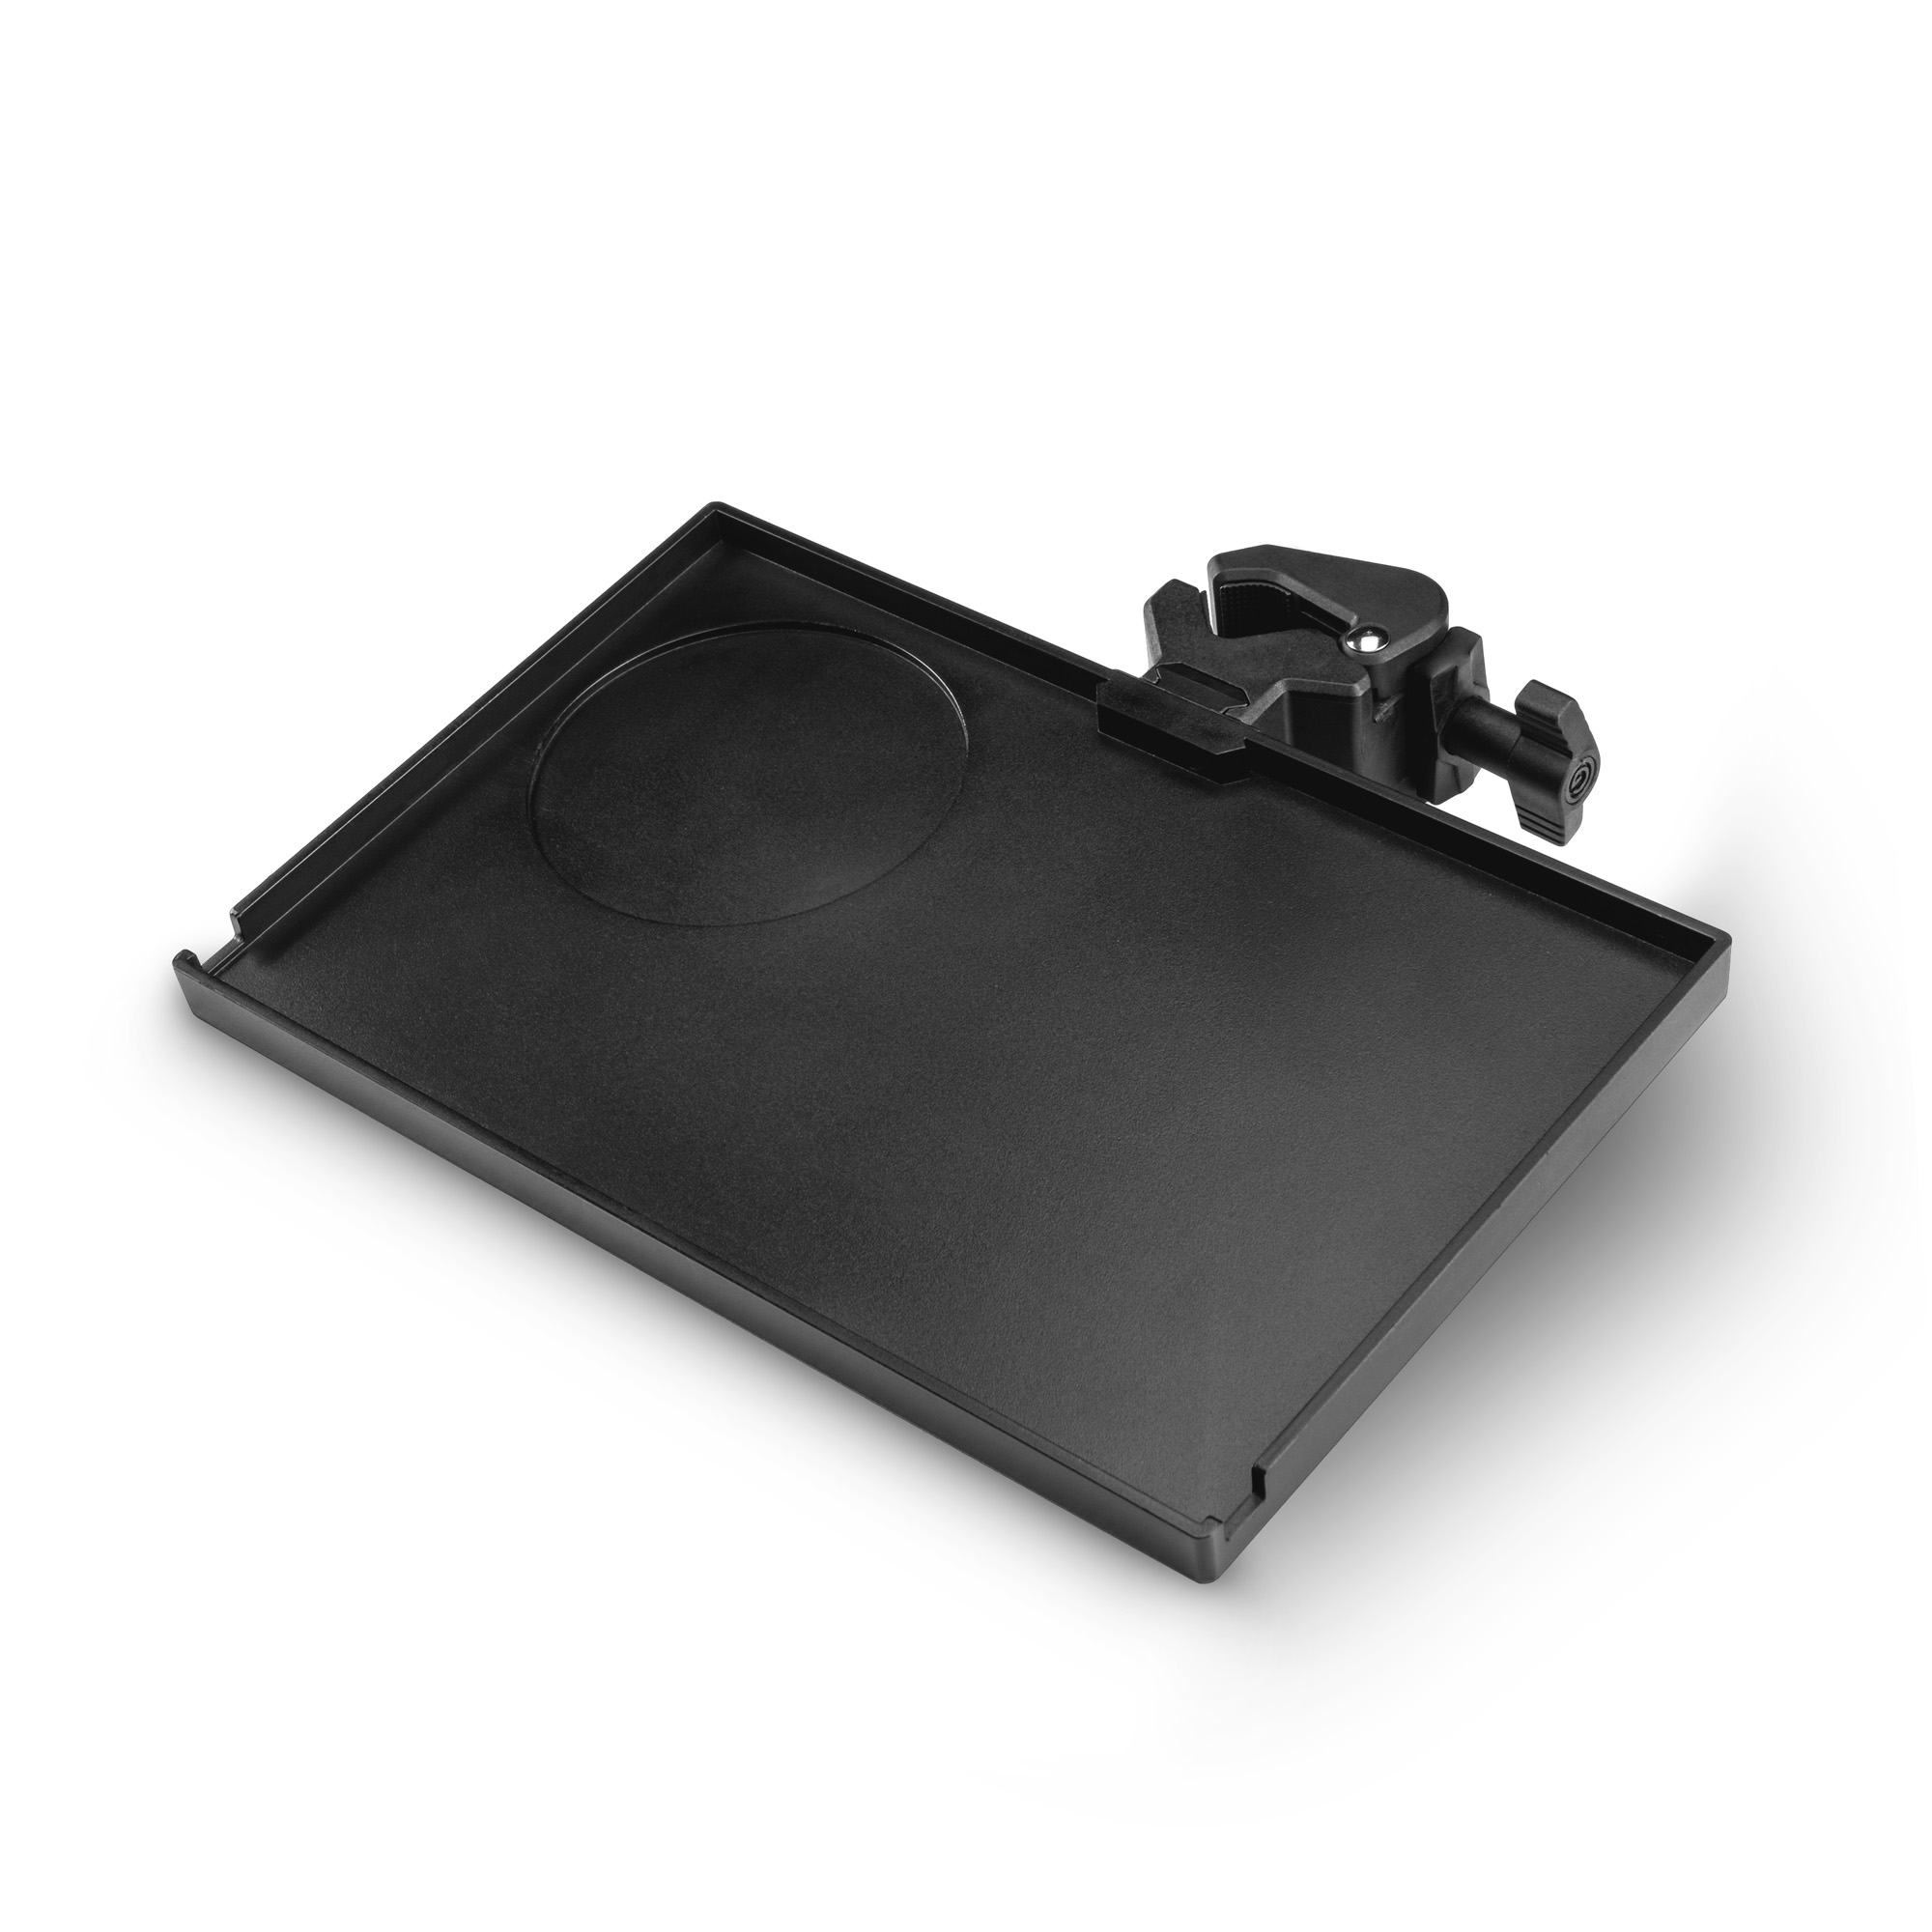 Support Gravity pour pied micro MA TRAY 1, Meilleur Tarif